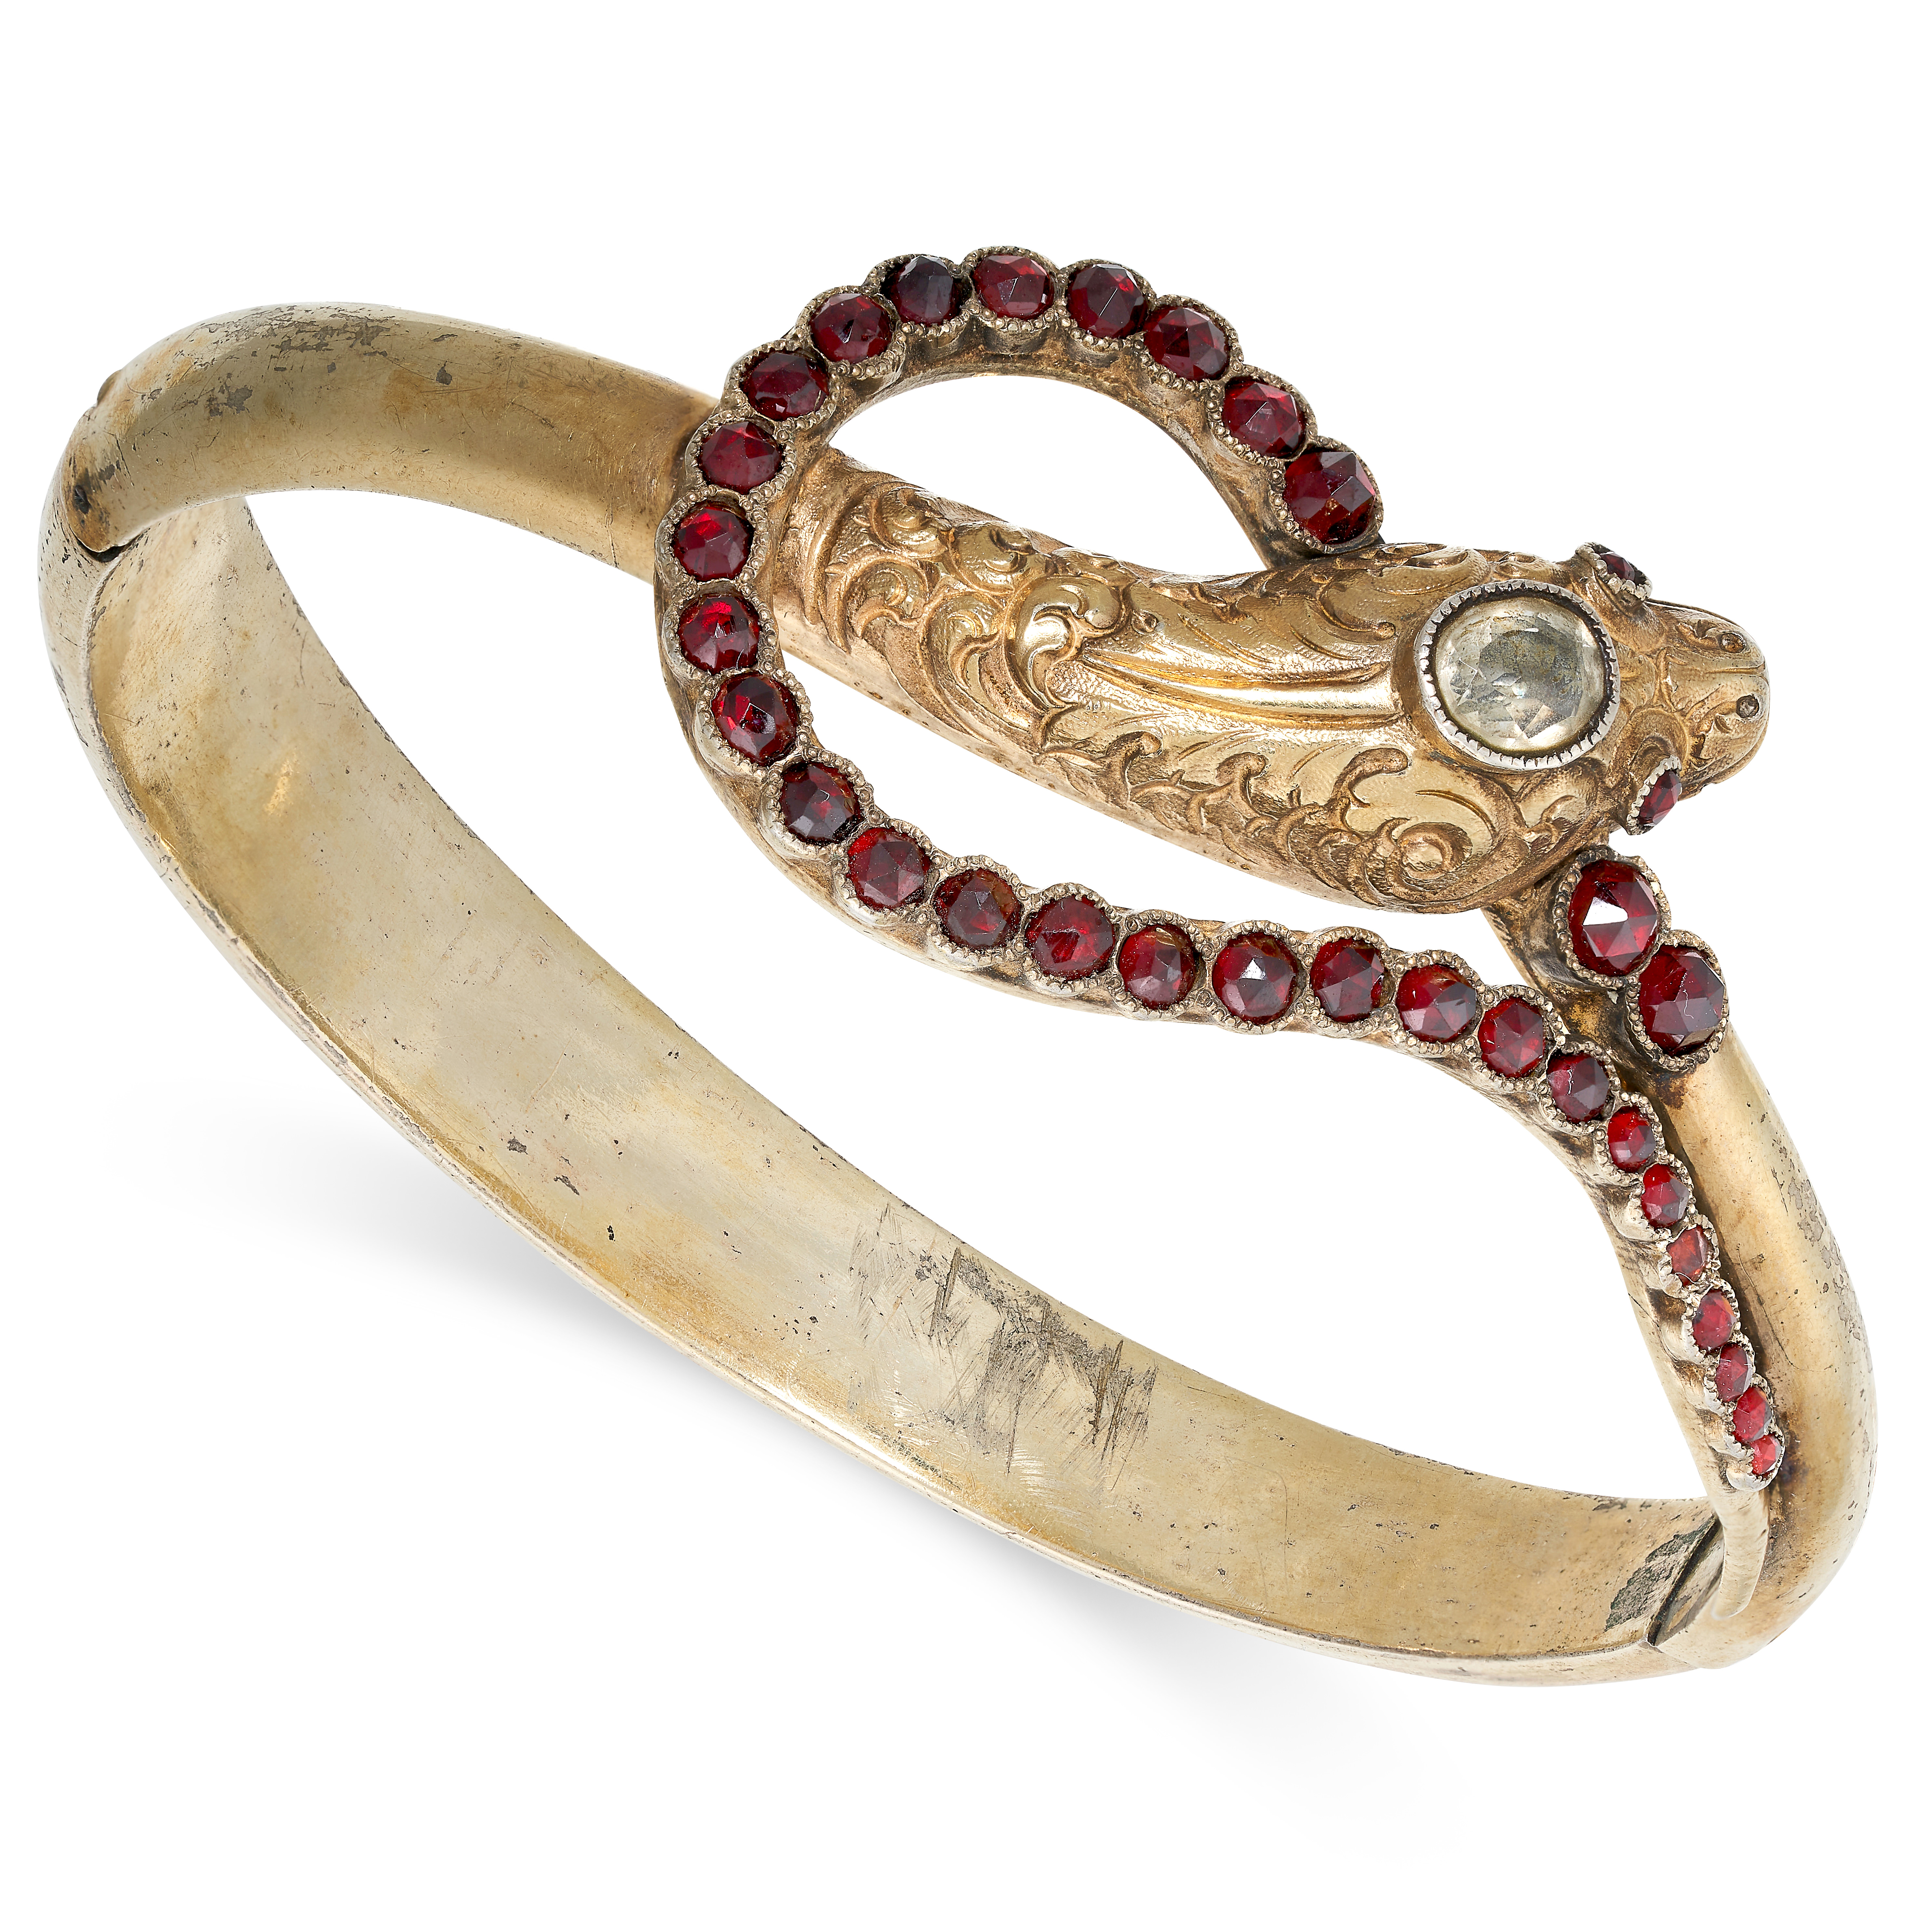 AN ANTIQUE GARNET AND PASTE SNAKE BANGLE designed as a snake coiled around on itself, the hinged